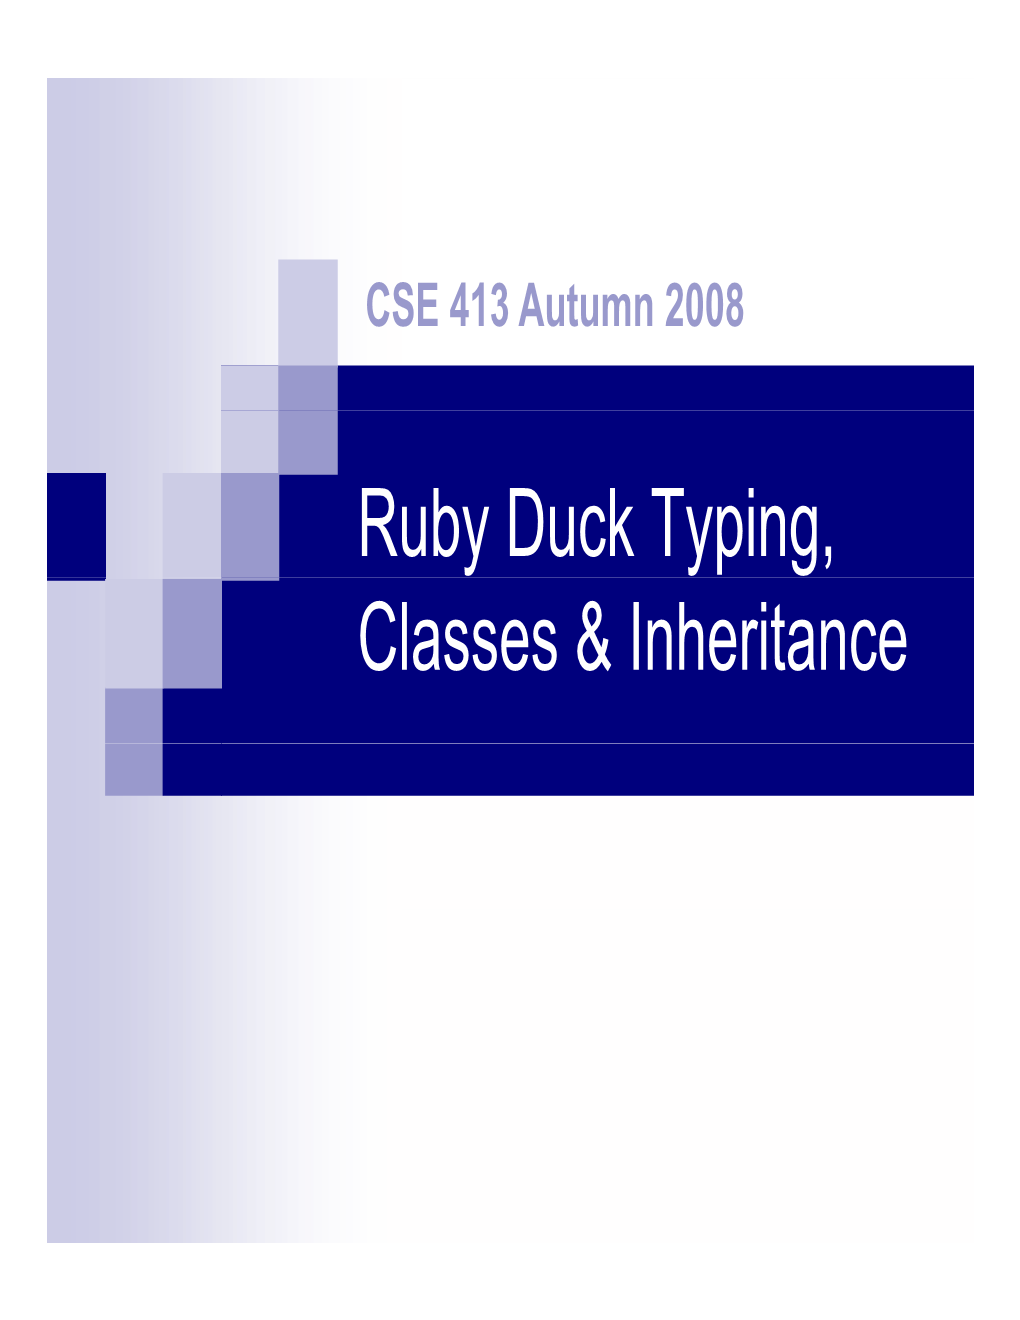 Ruby Duck Typing, Classes & Inheritance